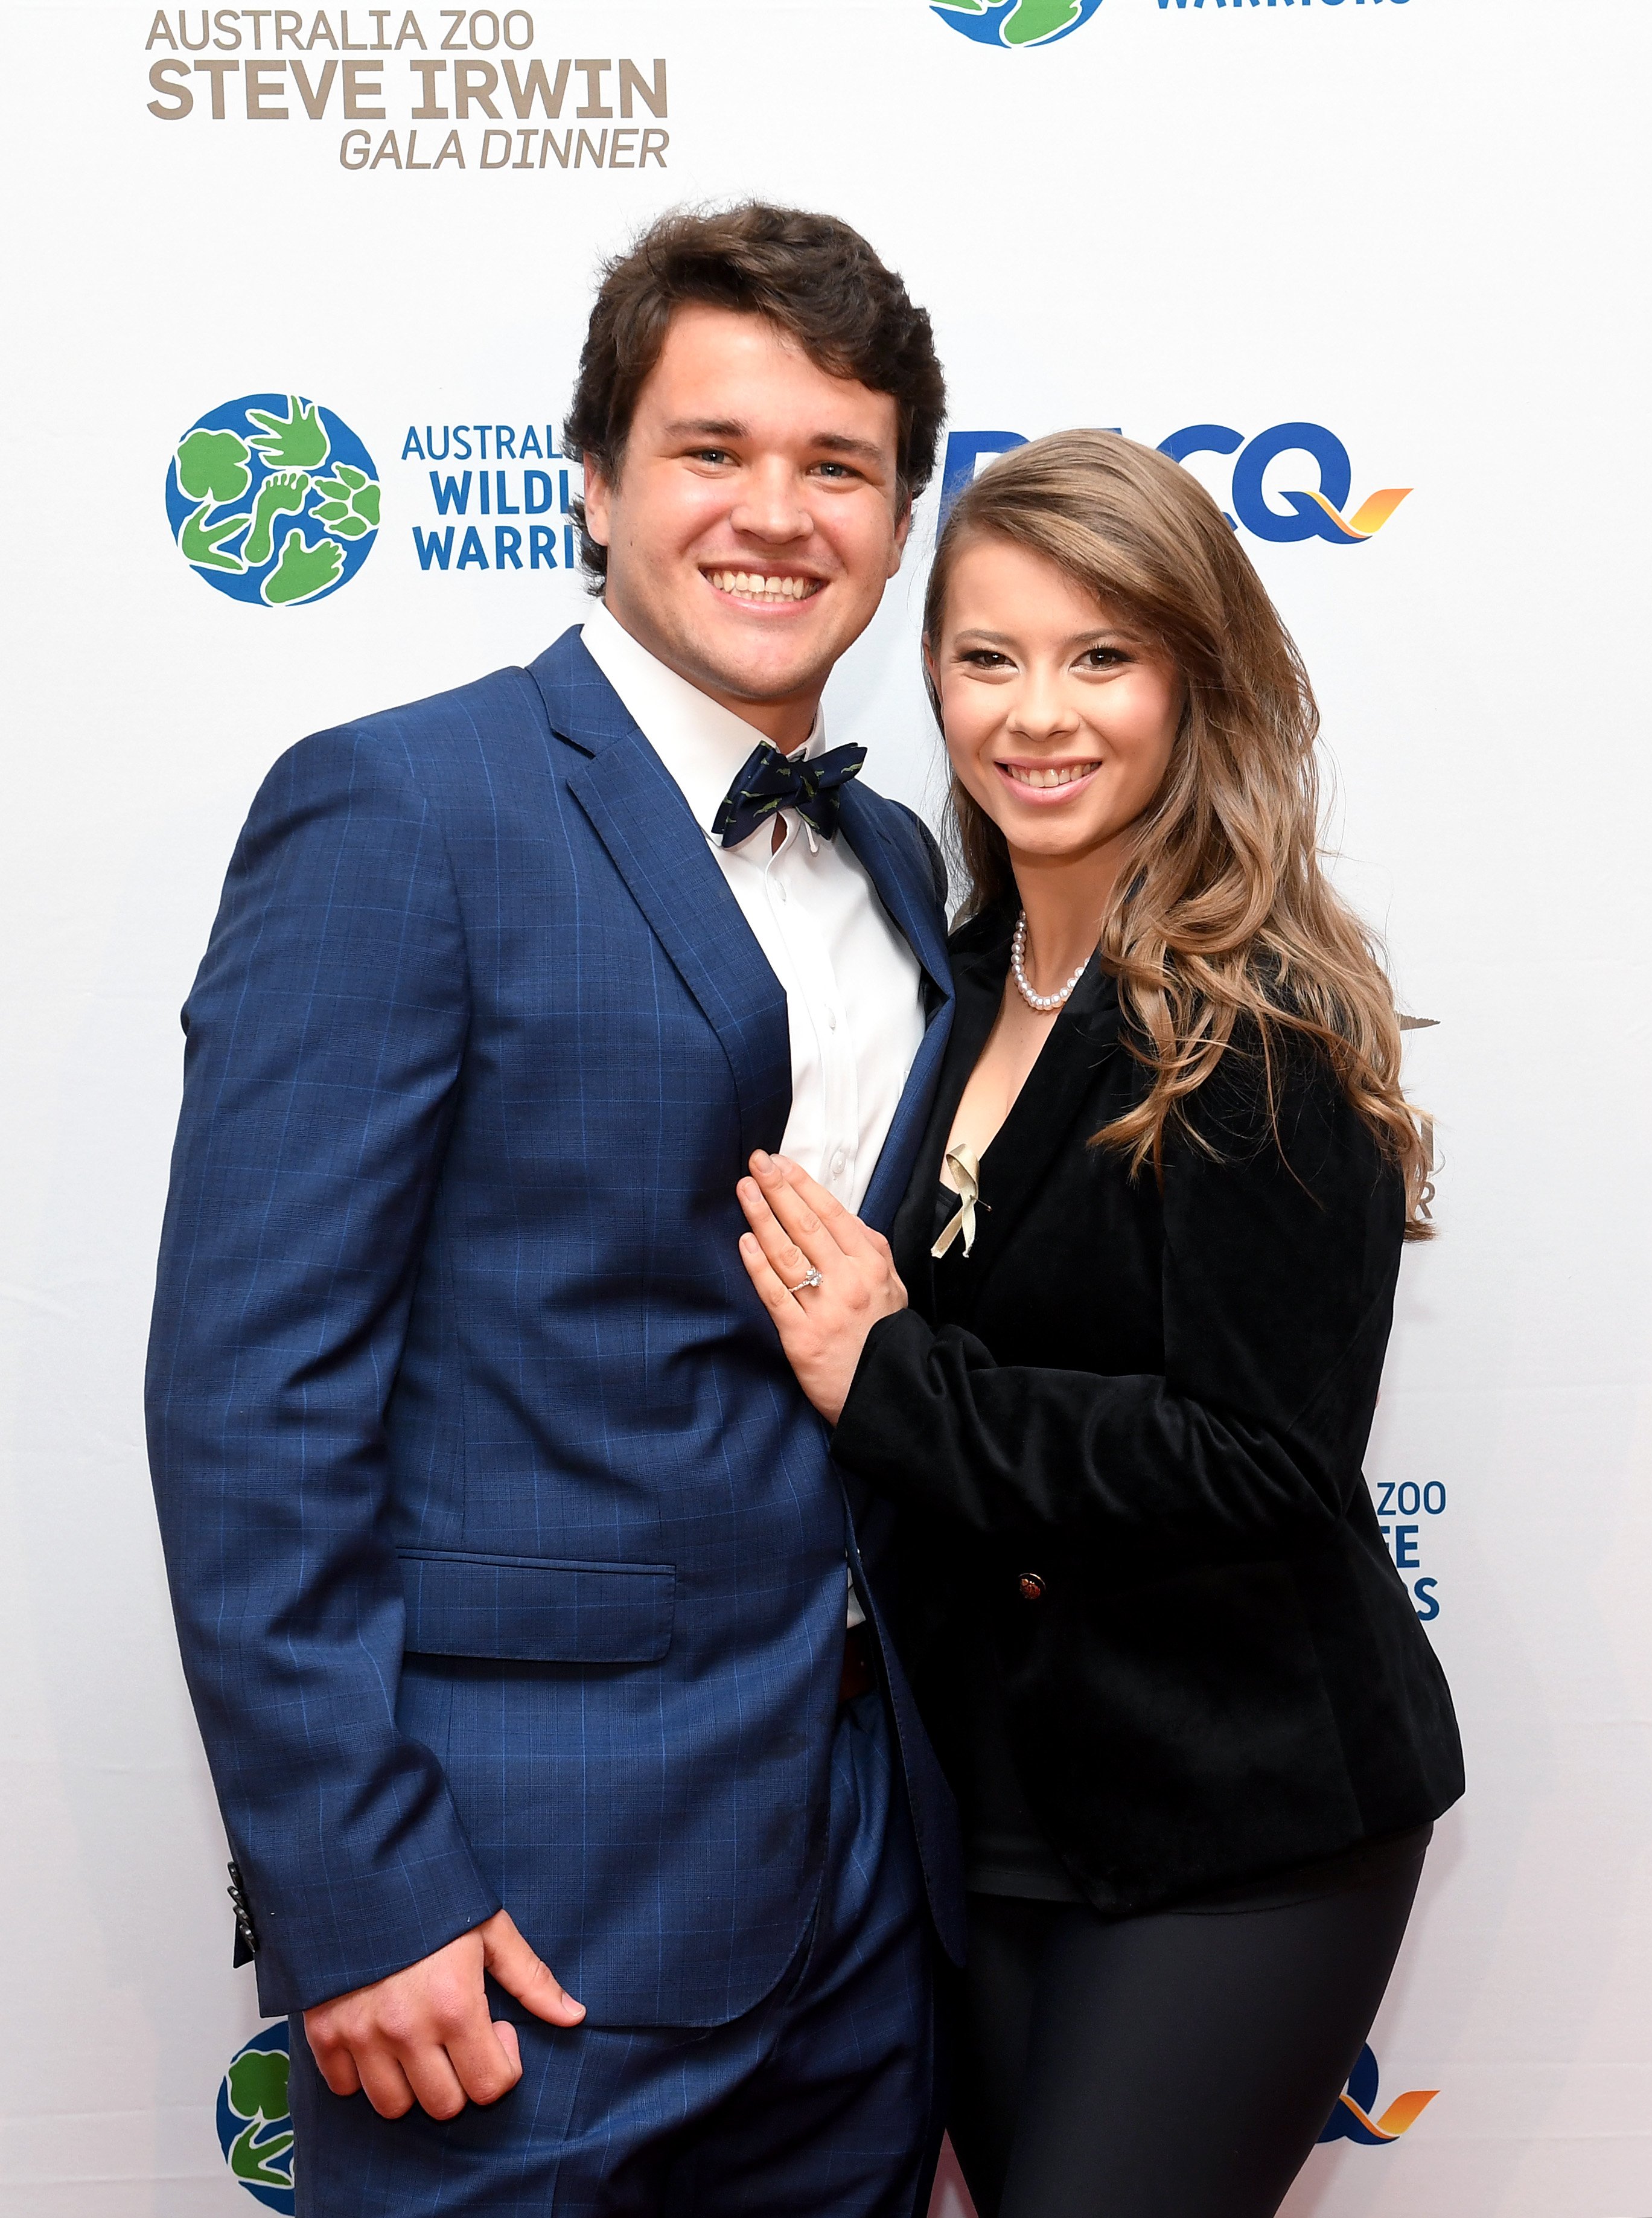 Chandler Powell and Bindi Irwin pictured at the annual Steve Irwin Gala Dinner at Brisbane Convention & Exhibition Centre, 2019, Brisbane, Australia. | Photo: Getty Images